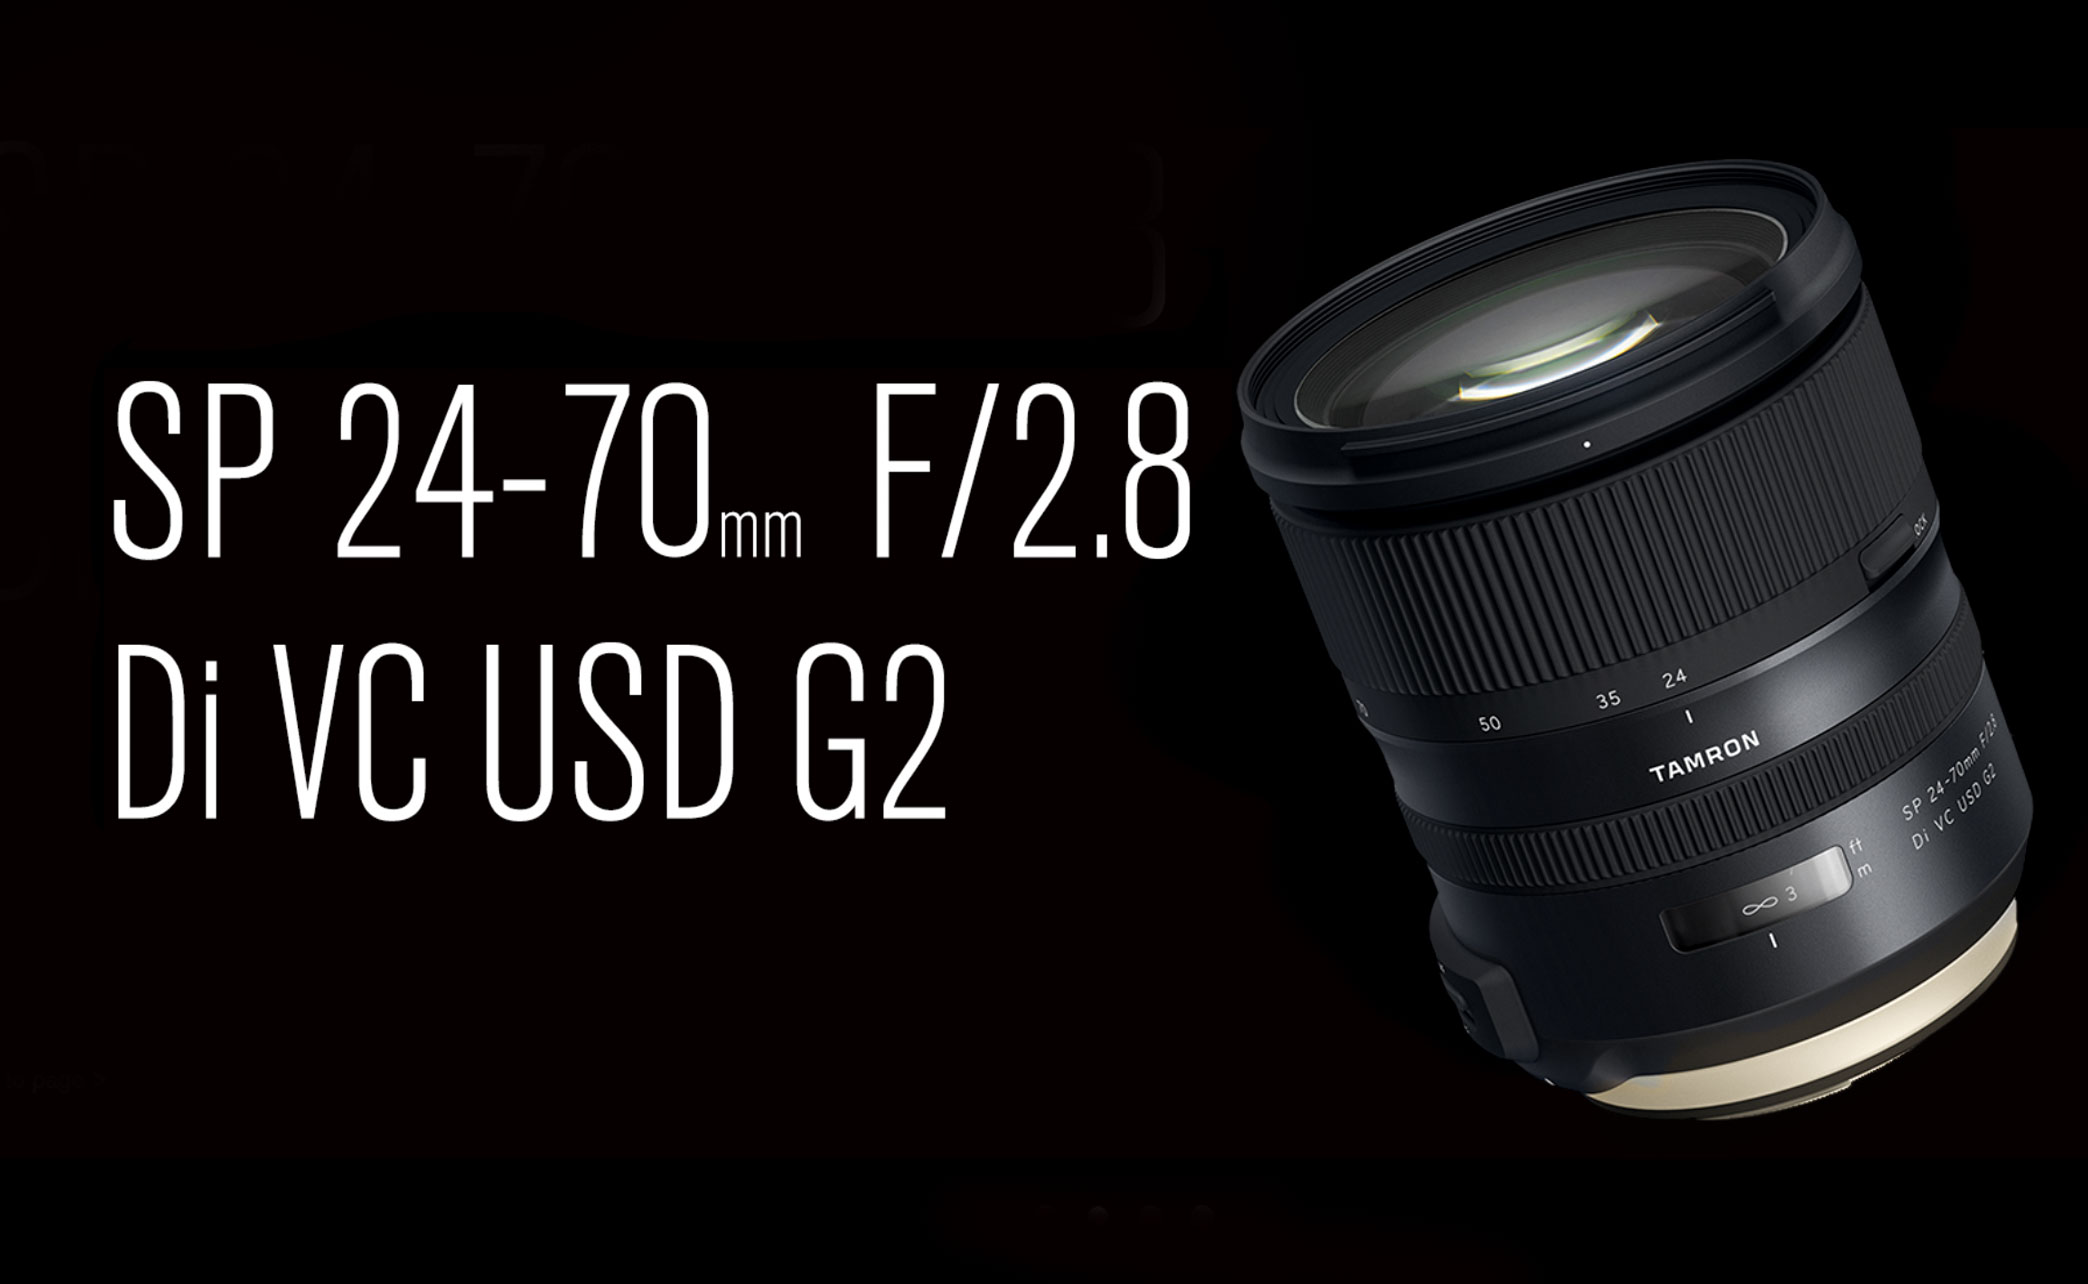 New Tamron Sp 24 70mm F 2 8 Di Vc Usd G2 Price Availability Released